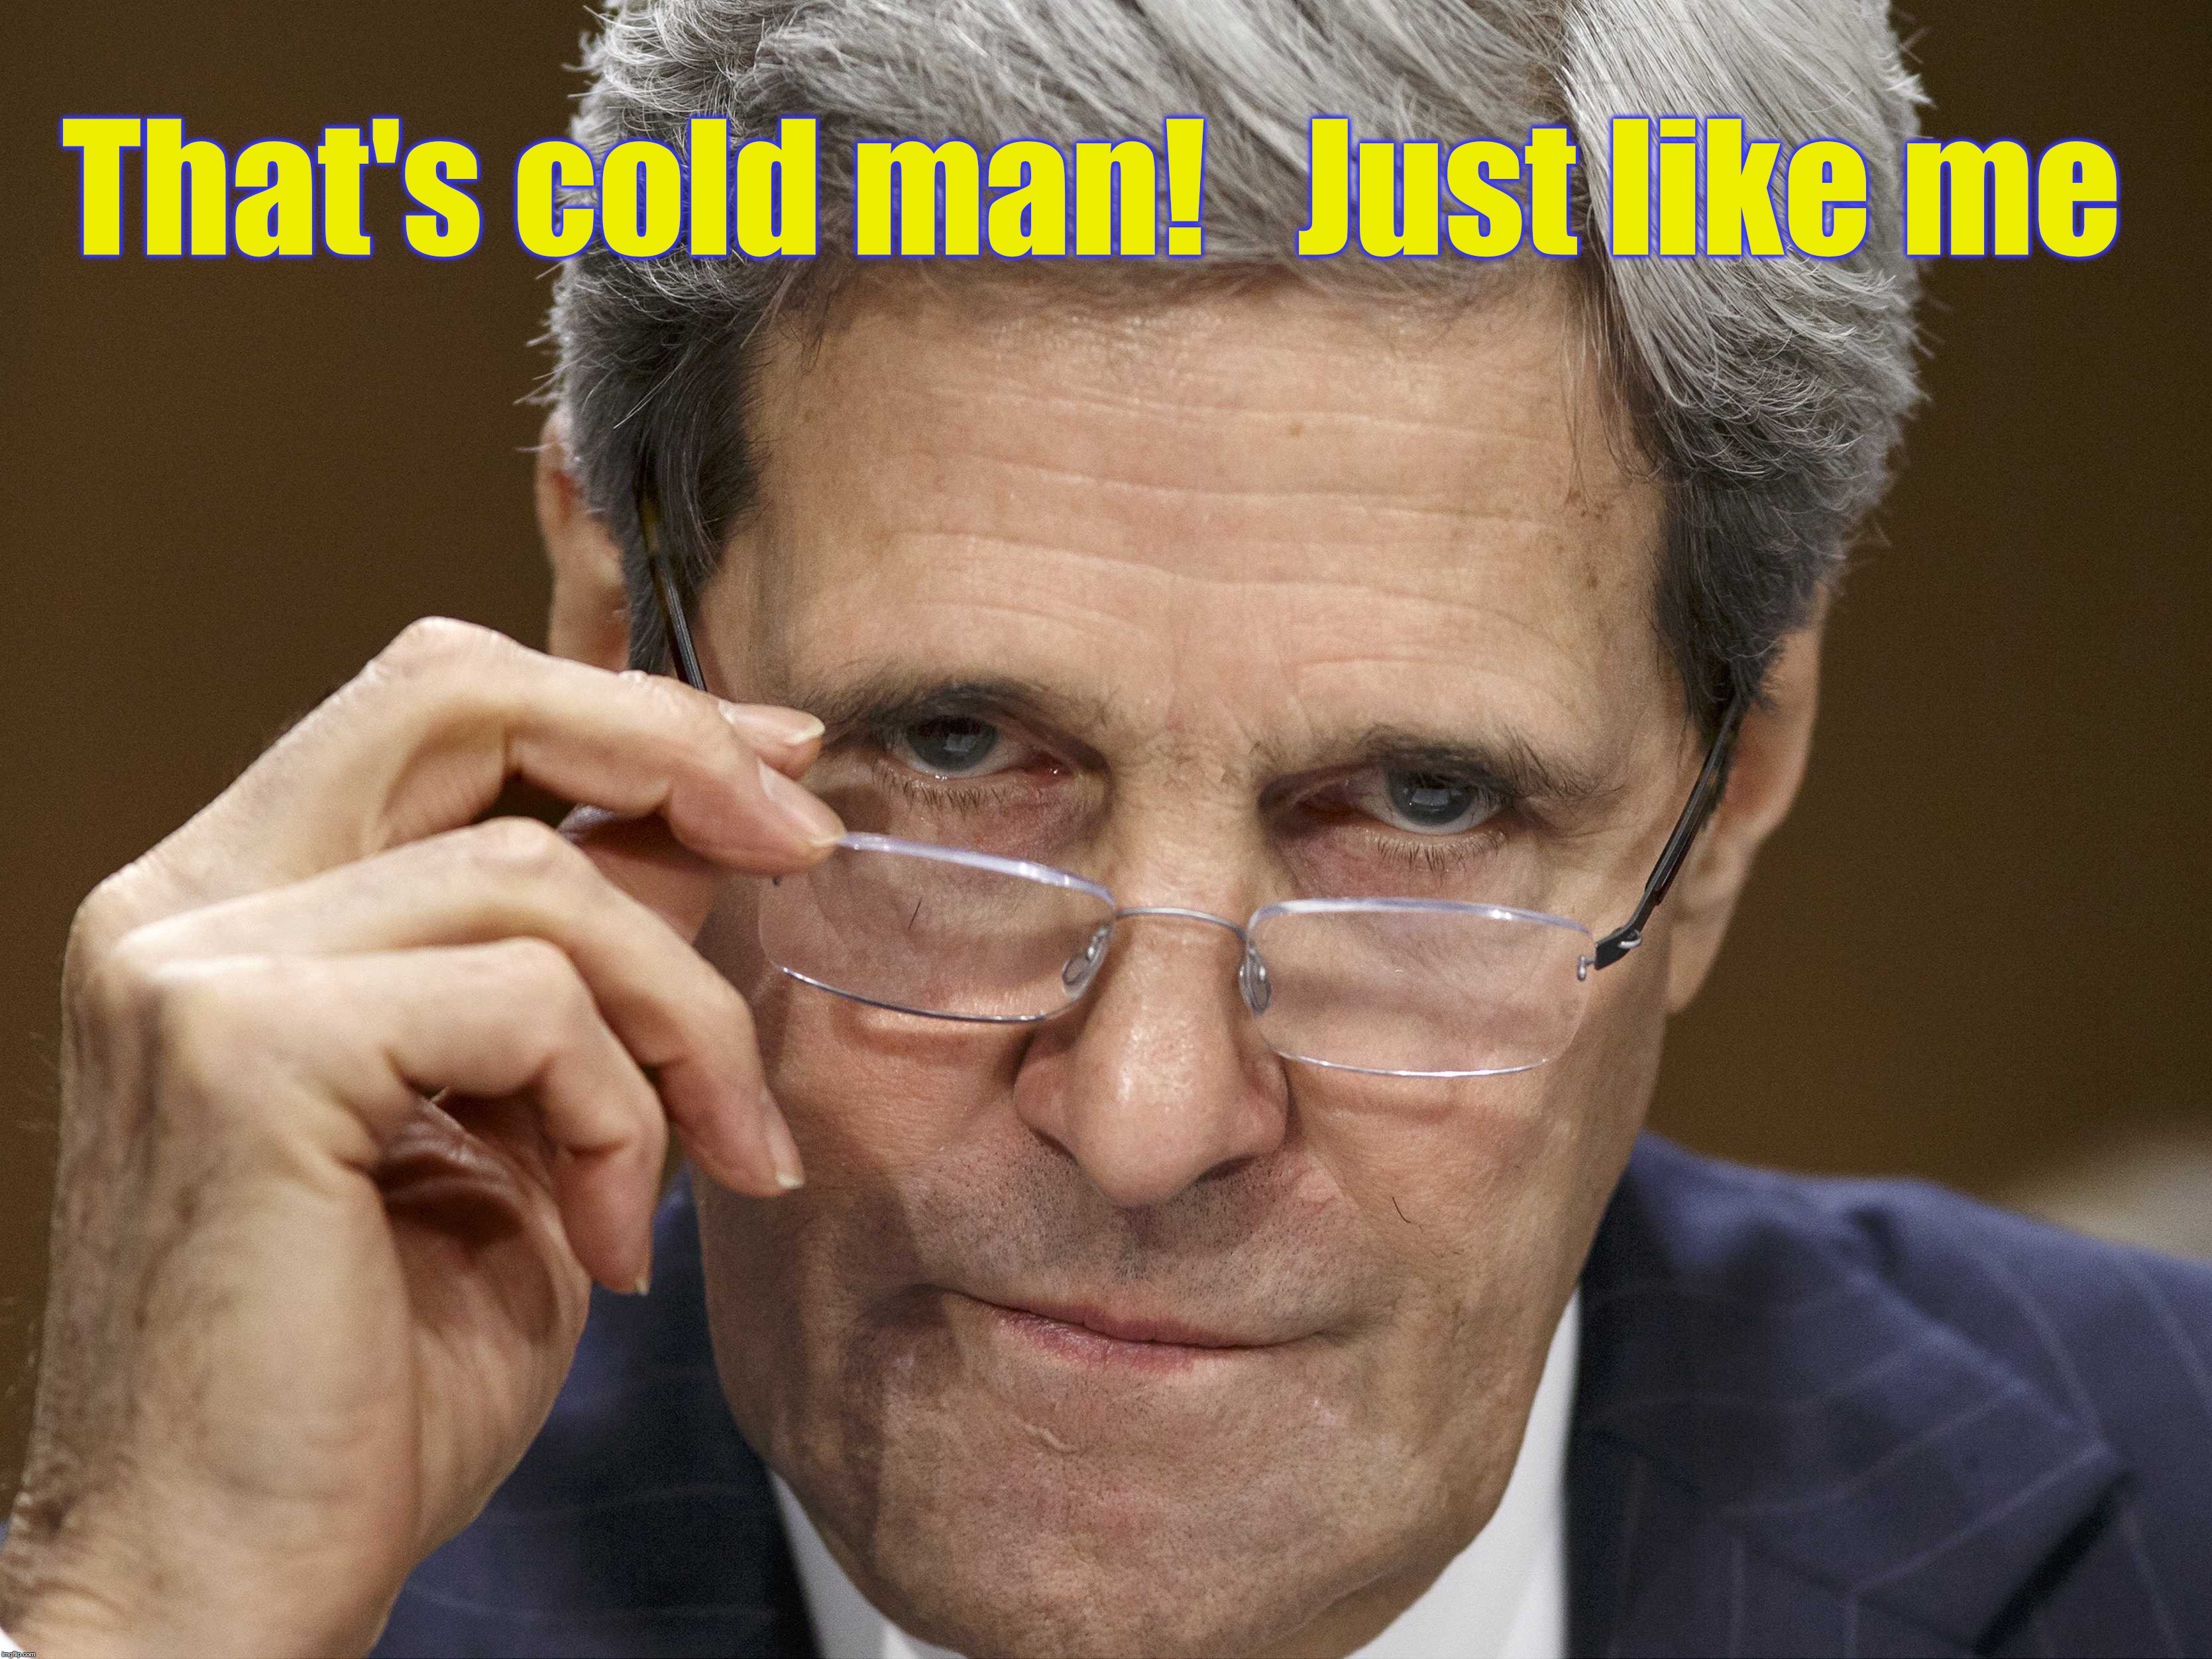 That's cold man!   Just like me | made w/ Imgflip meme maker